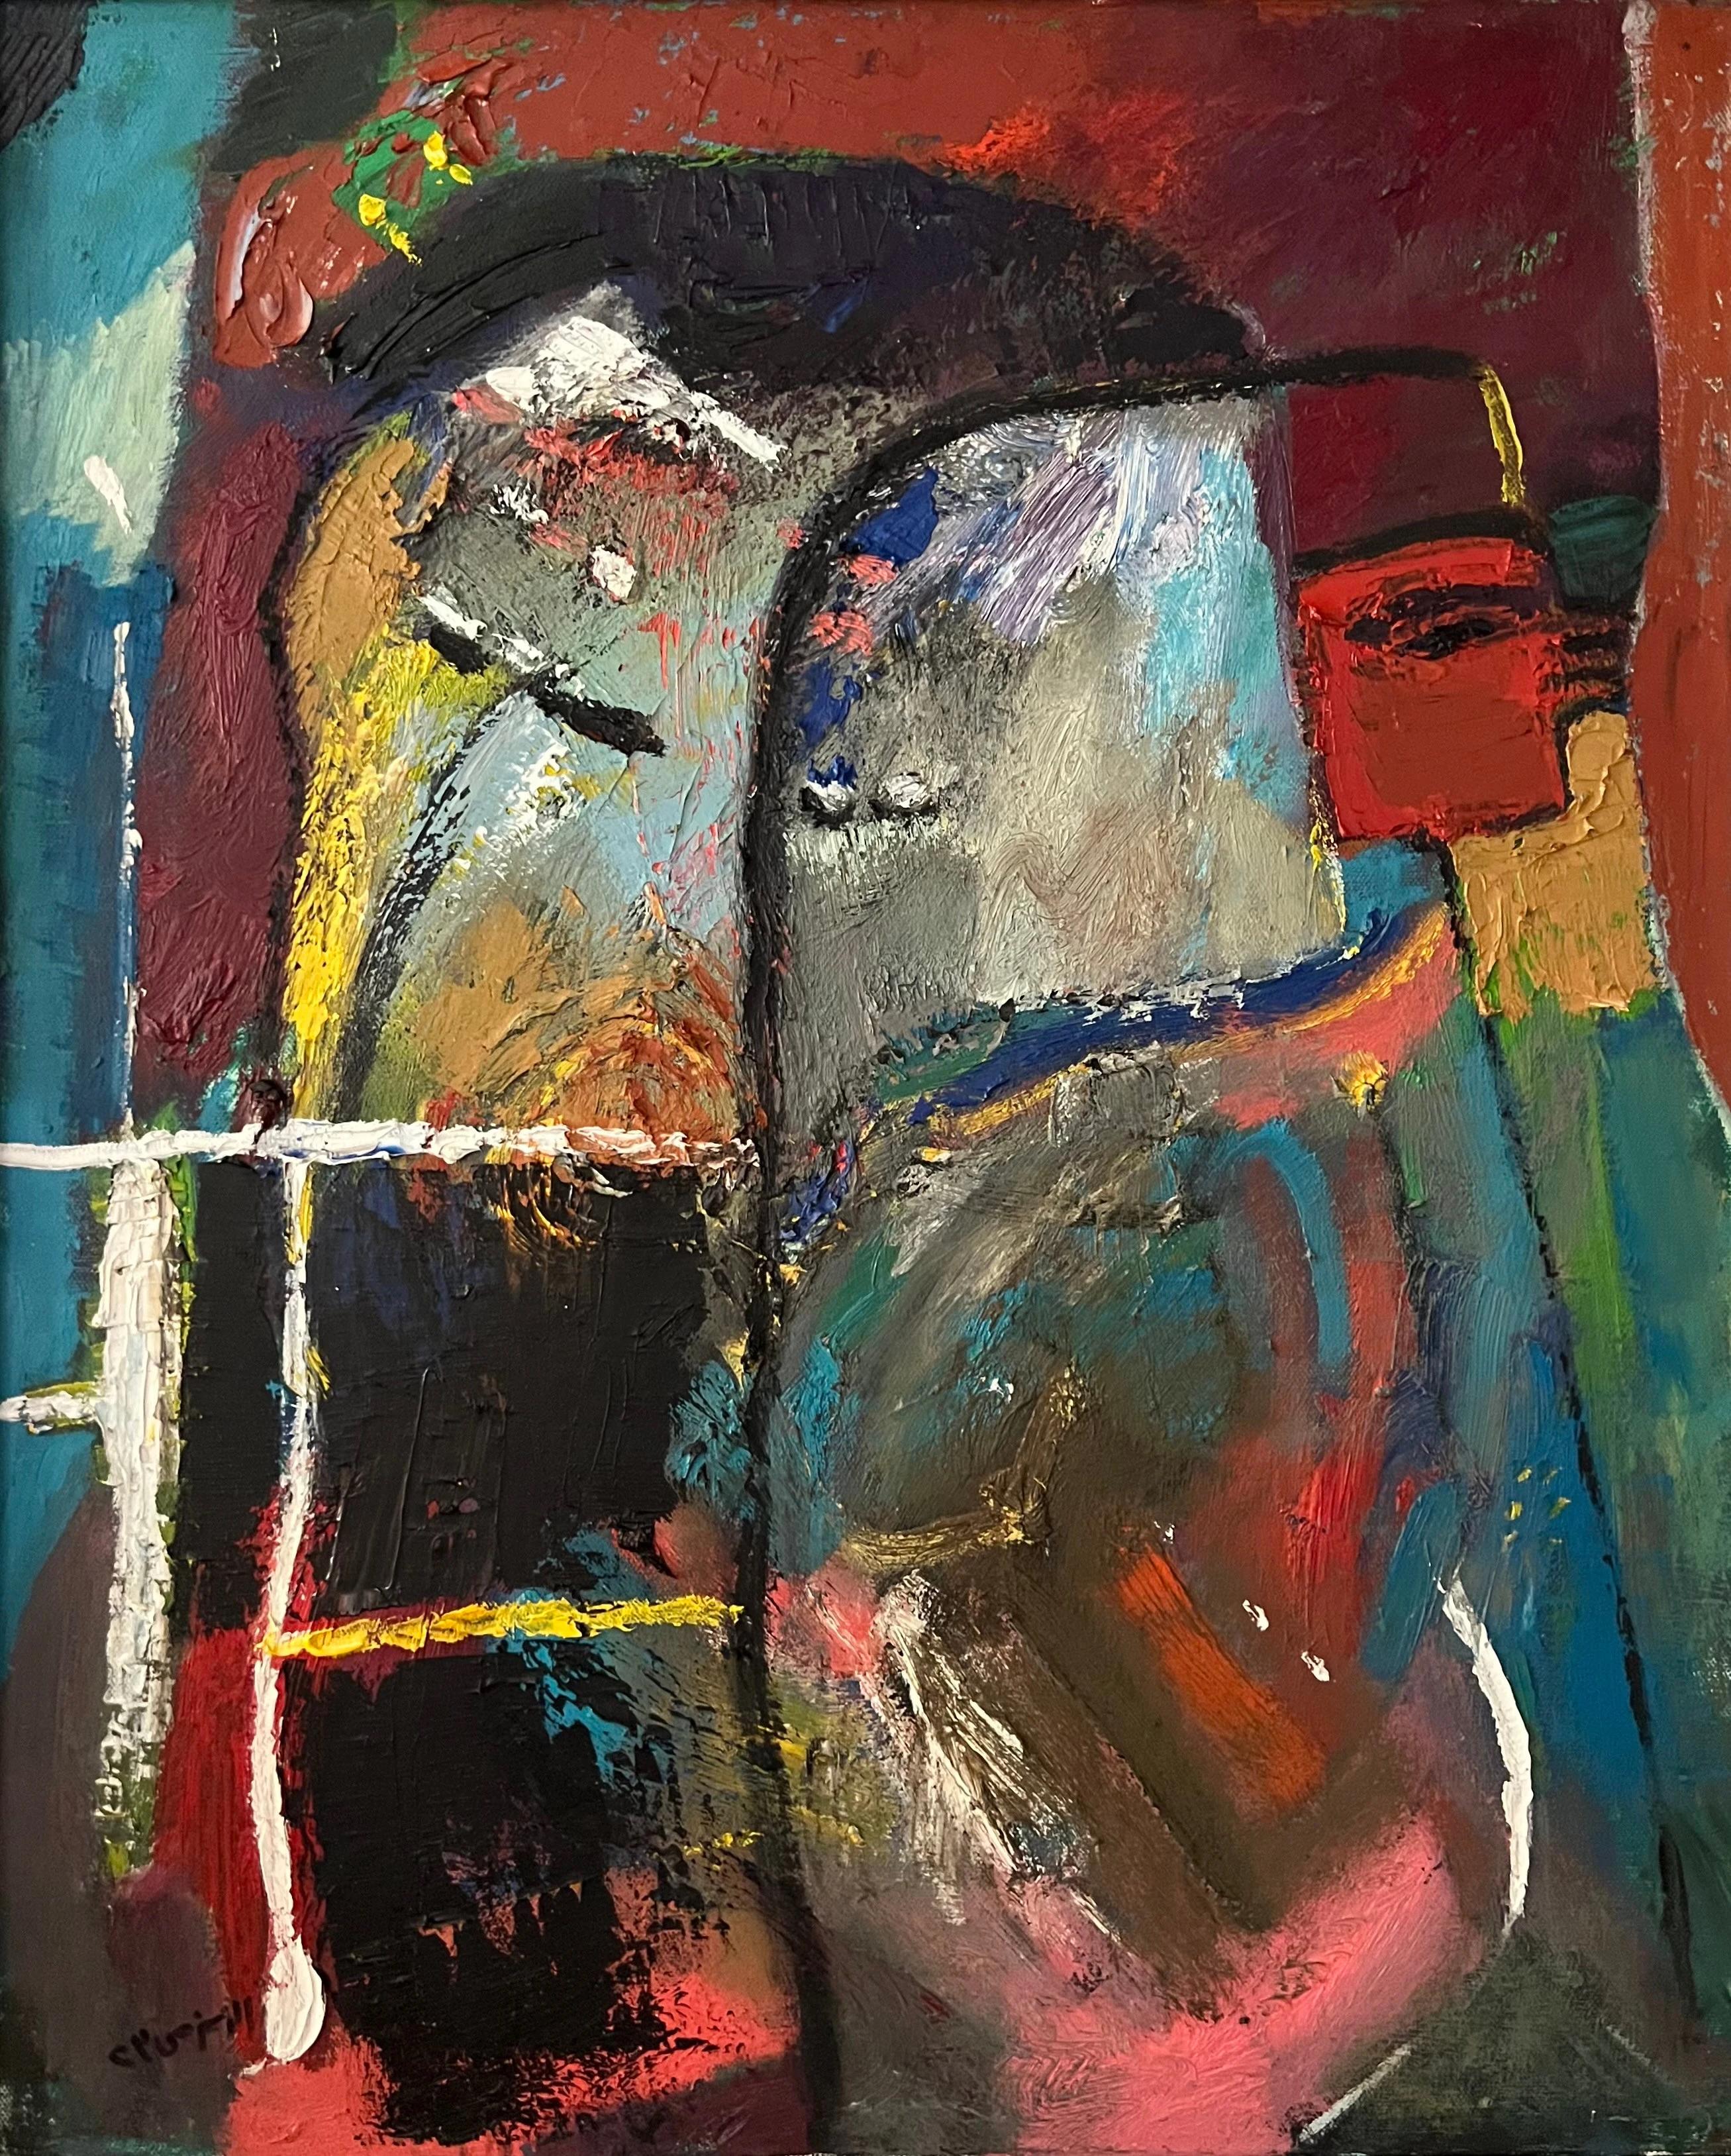 "Abstract Composition" Oil Painting 24" x 20" inch by Ashraf Zamzami


ABOUT
A characteristically bold and optimistic palette does not belie the inescapably pensive nature and at times, incomprehensible distance, that Zamzami's paintings evoke to